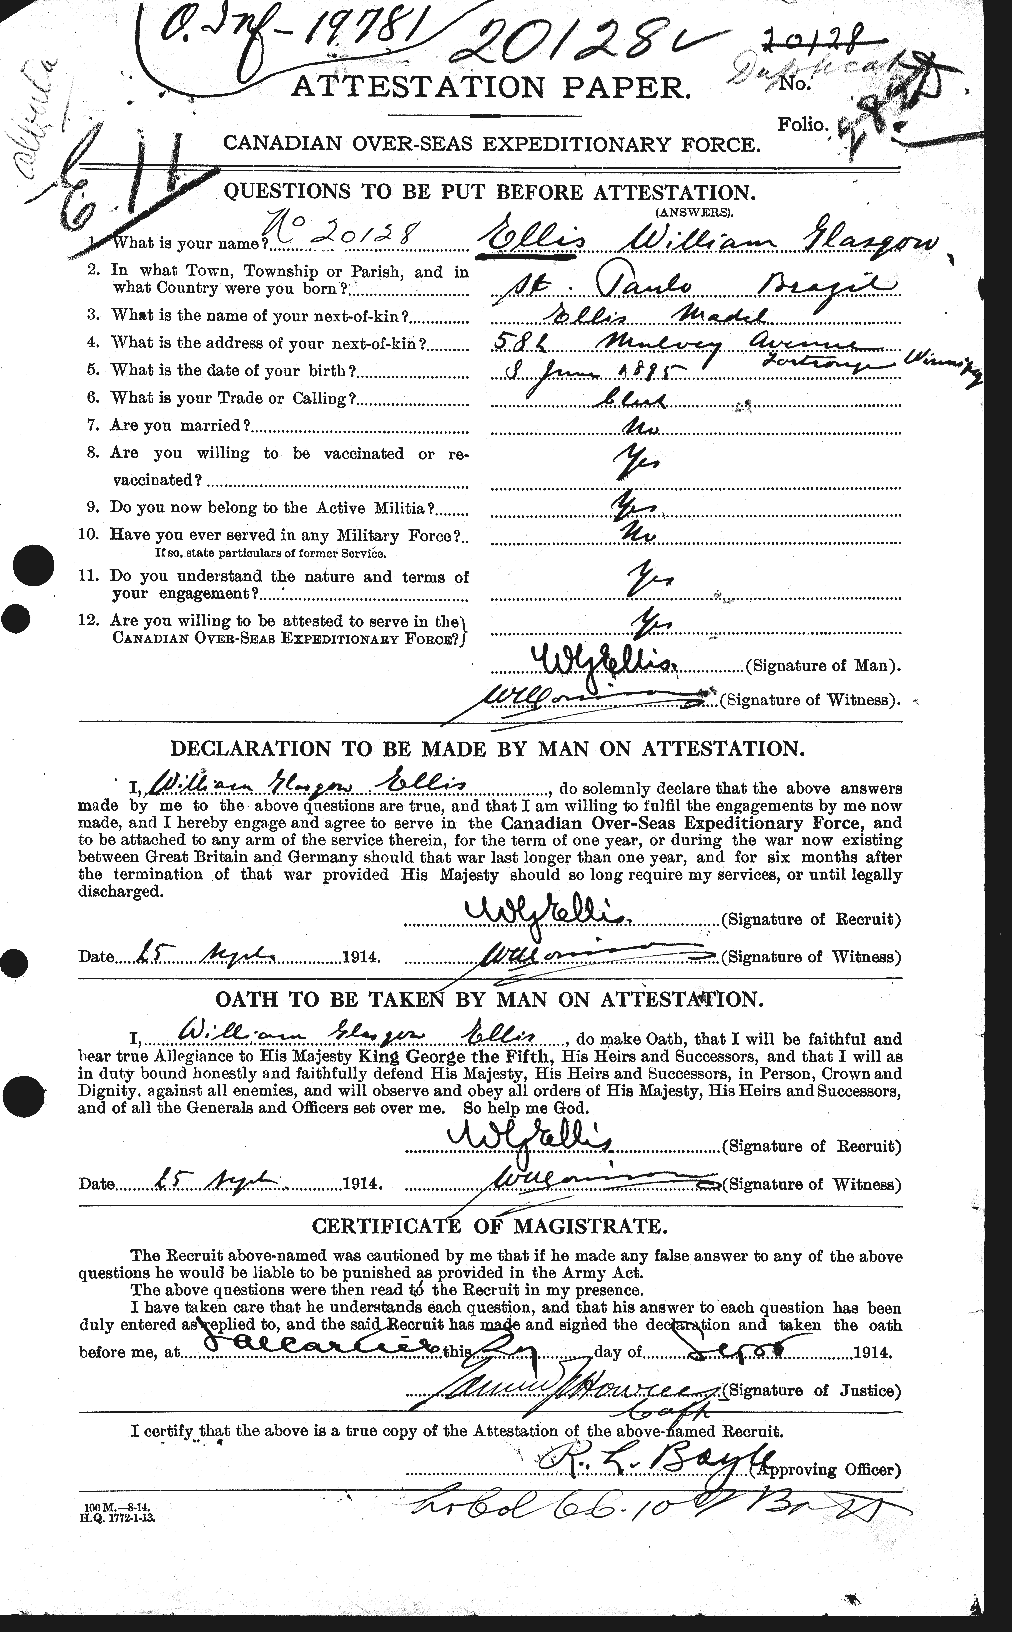 Personnel Records of the First World War - CEF 313696a